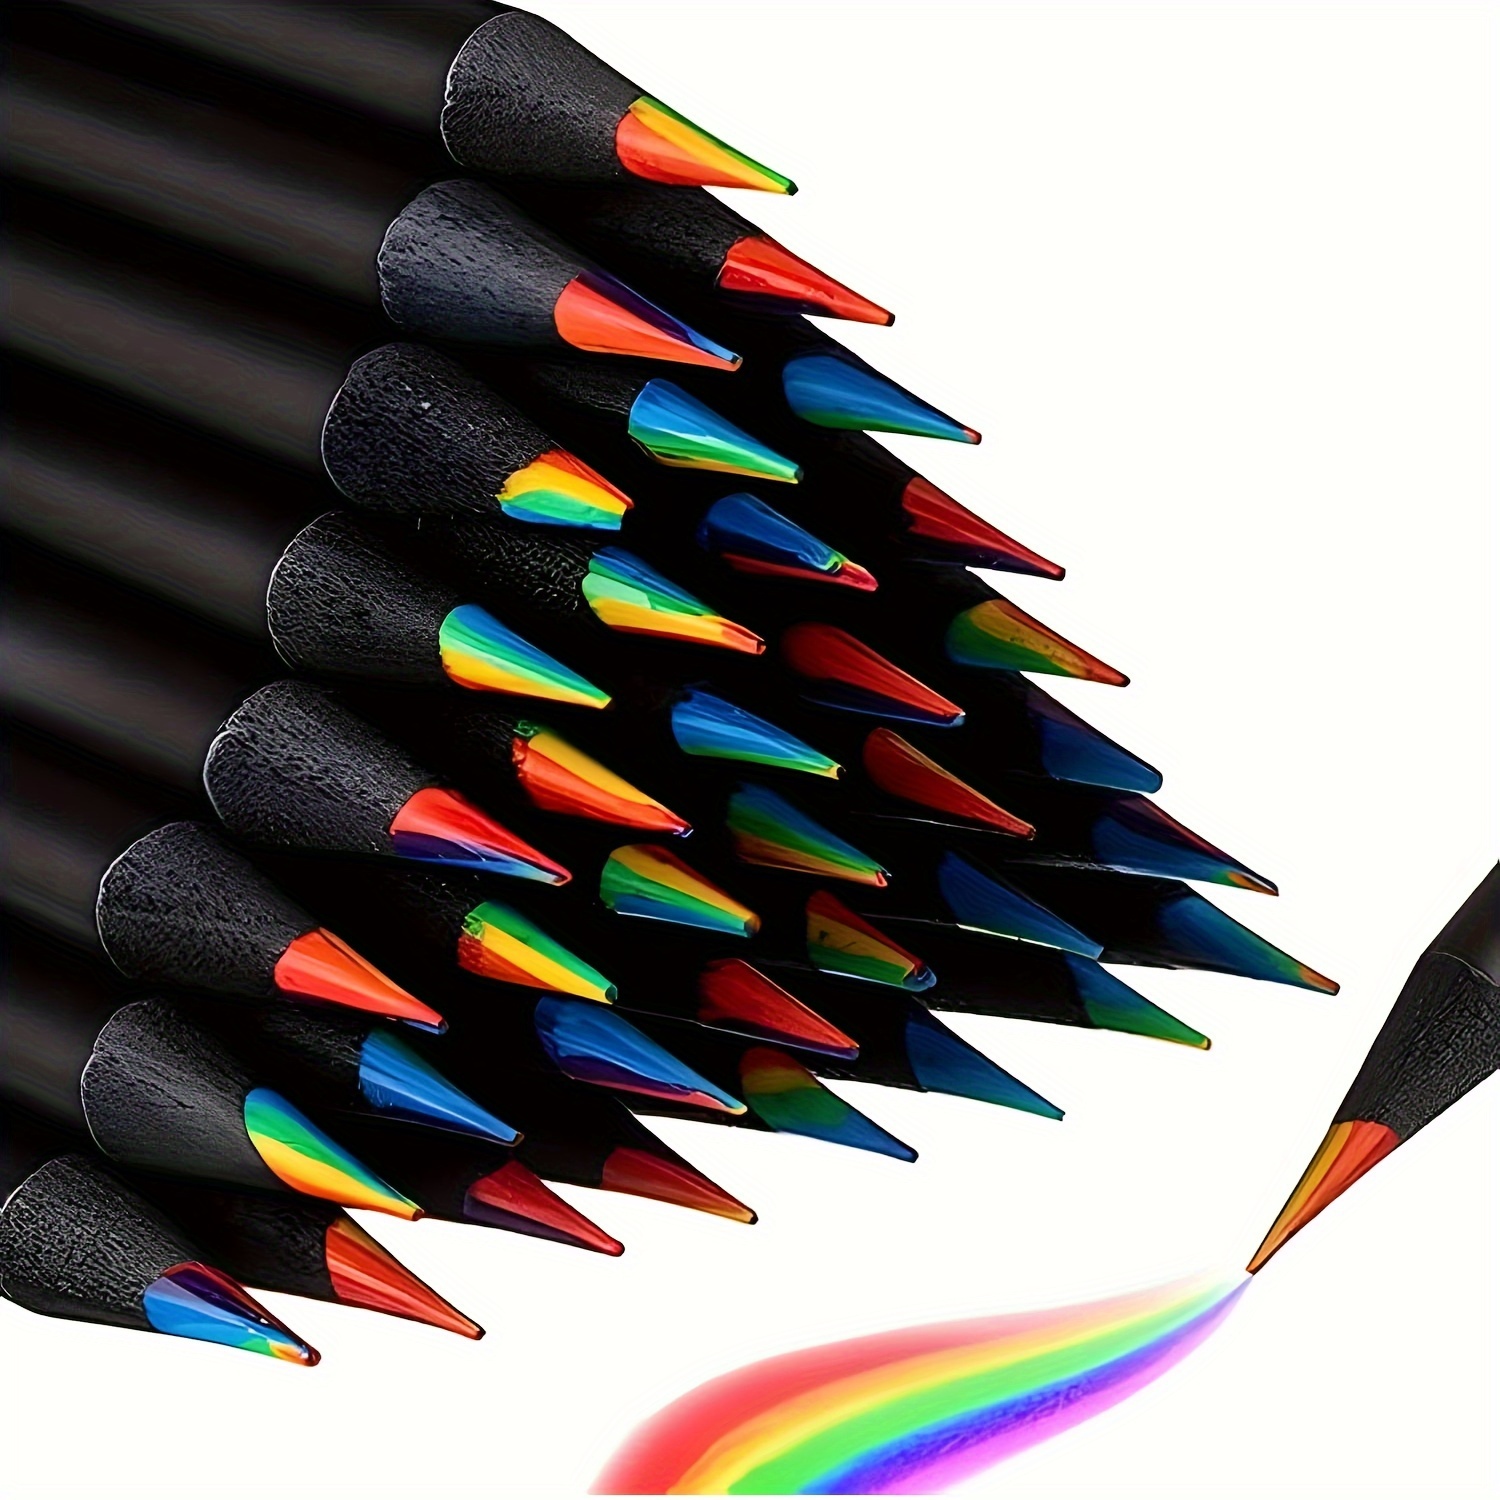  Hapikalor 12-Color Rainbow Pencils Aesthetic Jumbo Colored  Pencils for Adult Coloring Sketching Drawing, Cute Drawing Kit Fun Pencils  Cool Gifts Stuff Art Supplies for Adults Kids, School Supplies : Toys 